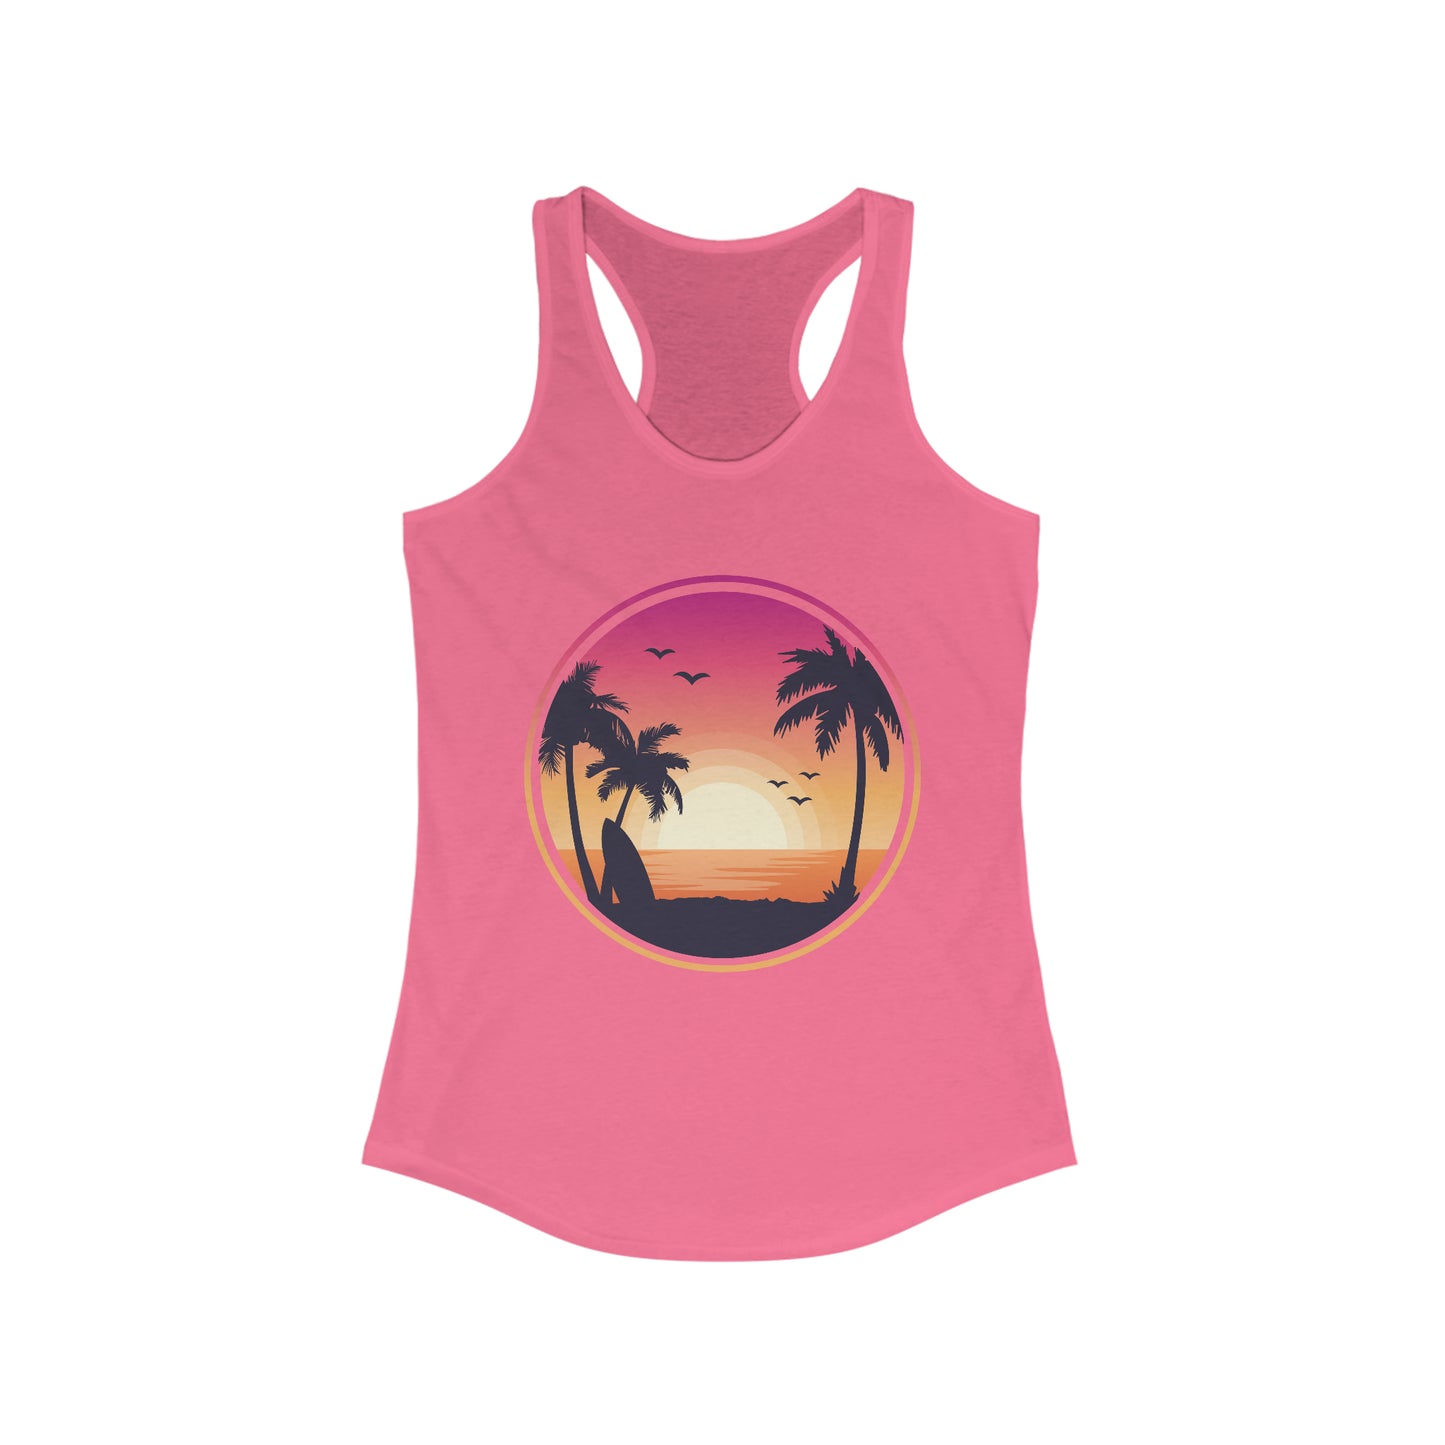 Tropical Sunset Tank Top For Woman Sunset Tank With Palm Tree Top For Summer Shirt For Beach Vibes Tank Top